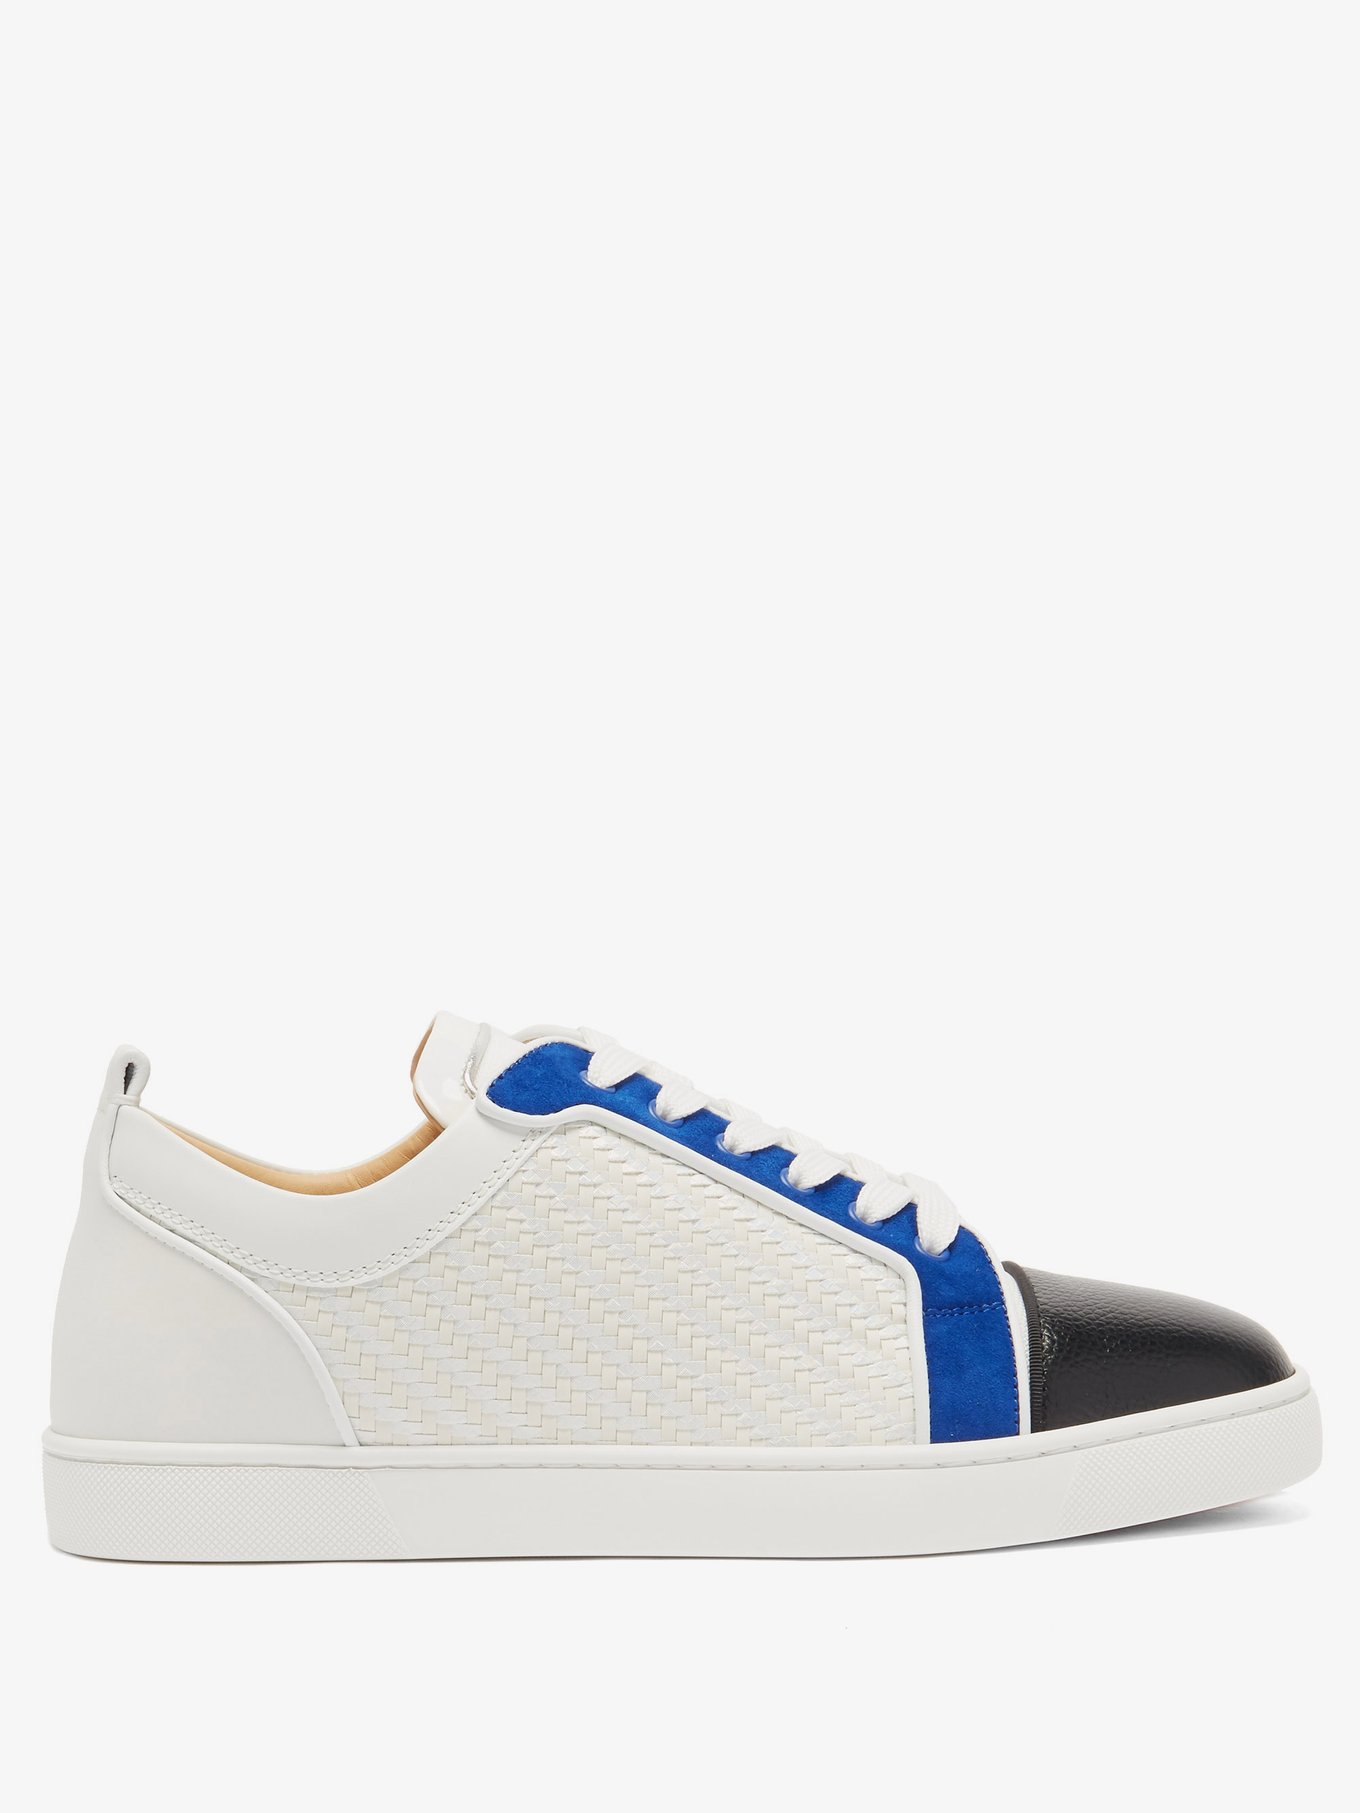 Christian Louboutin Fun Louis Junior Marble-effect High-top Woven Trainers  in Blue for Men